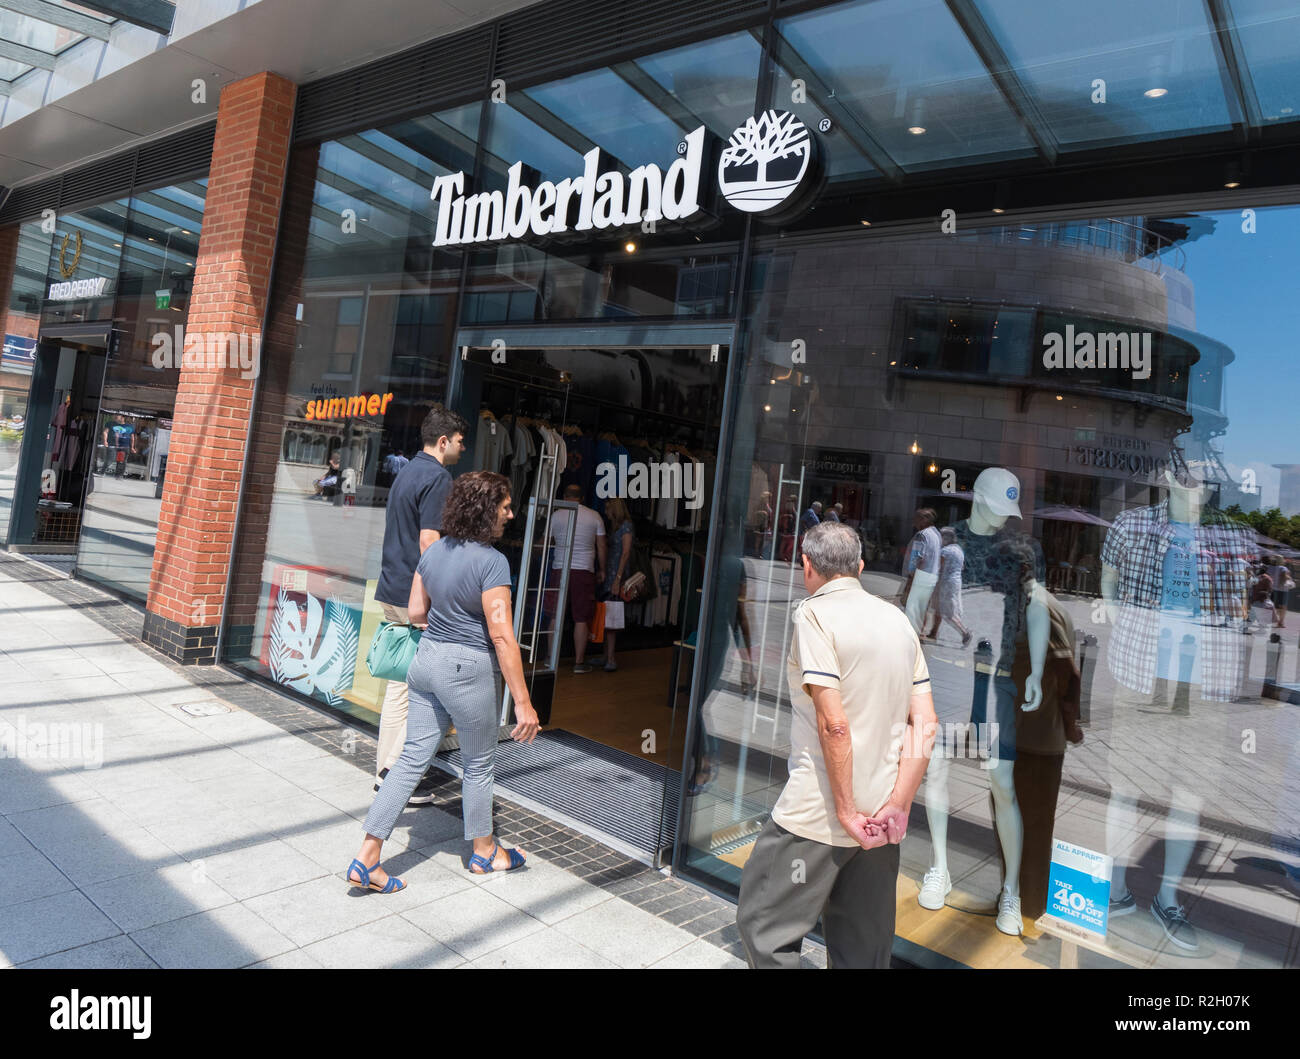 Timberland Clothing High Resolution Stock Photography and Images - Alamy